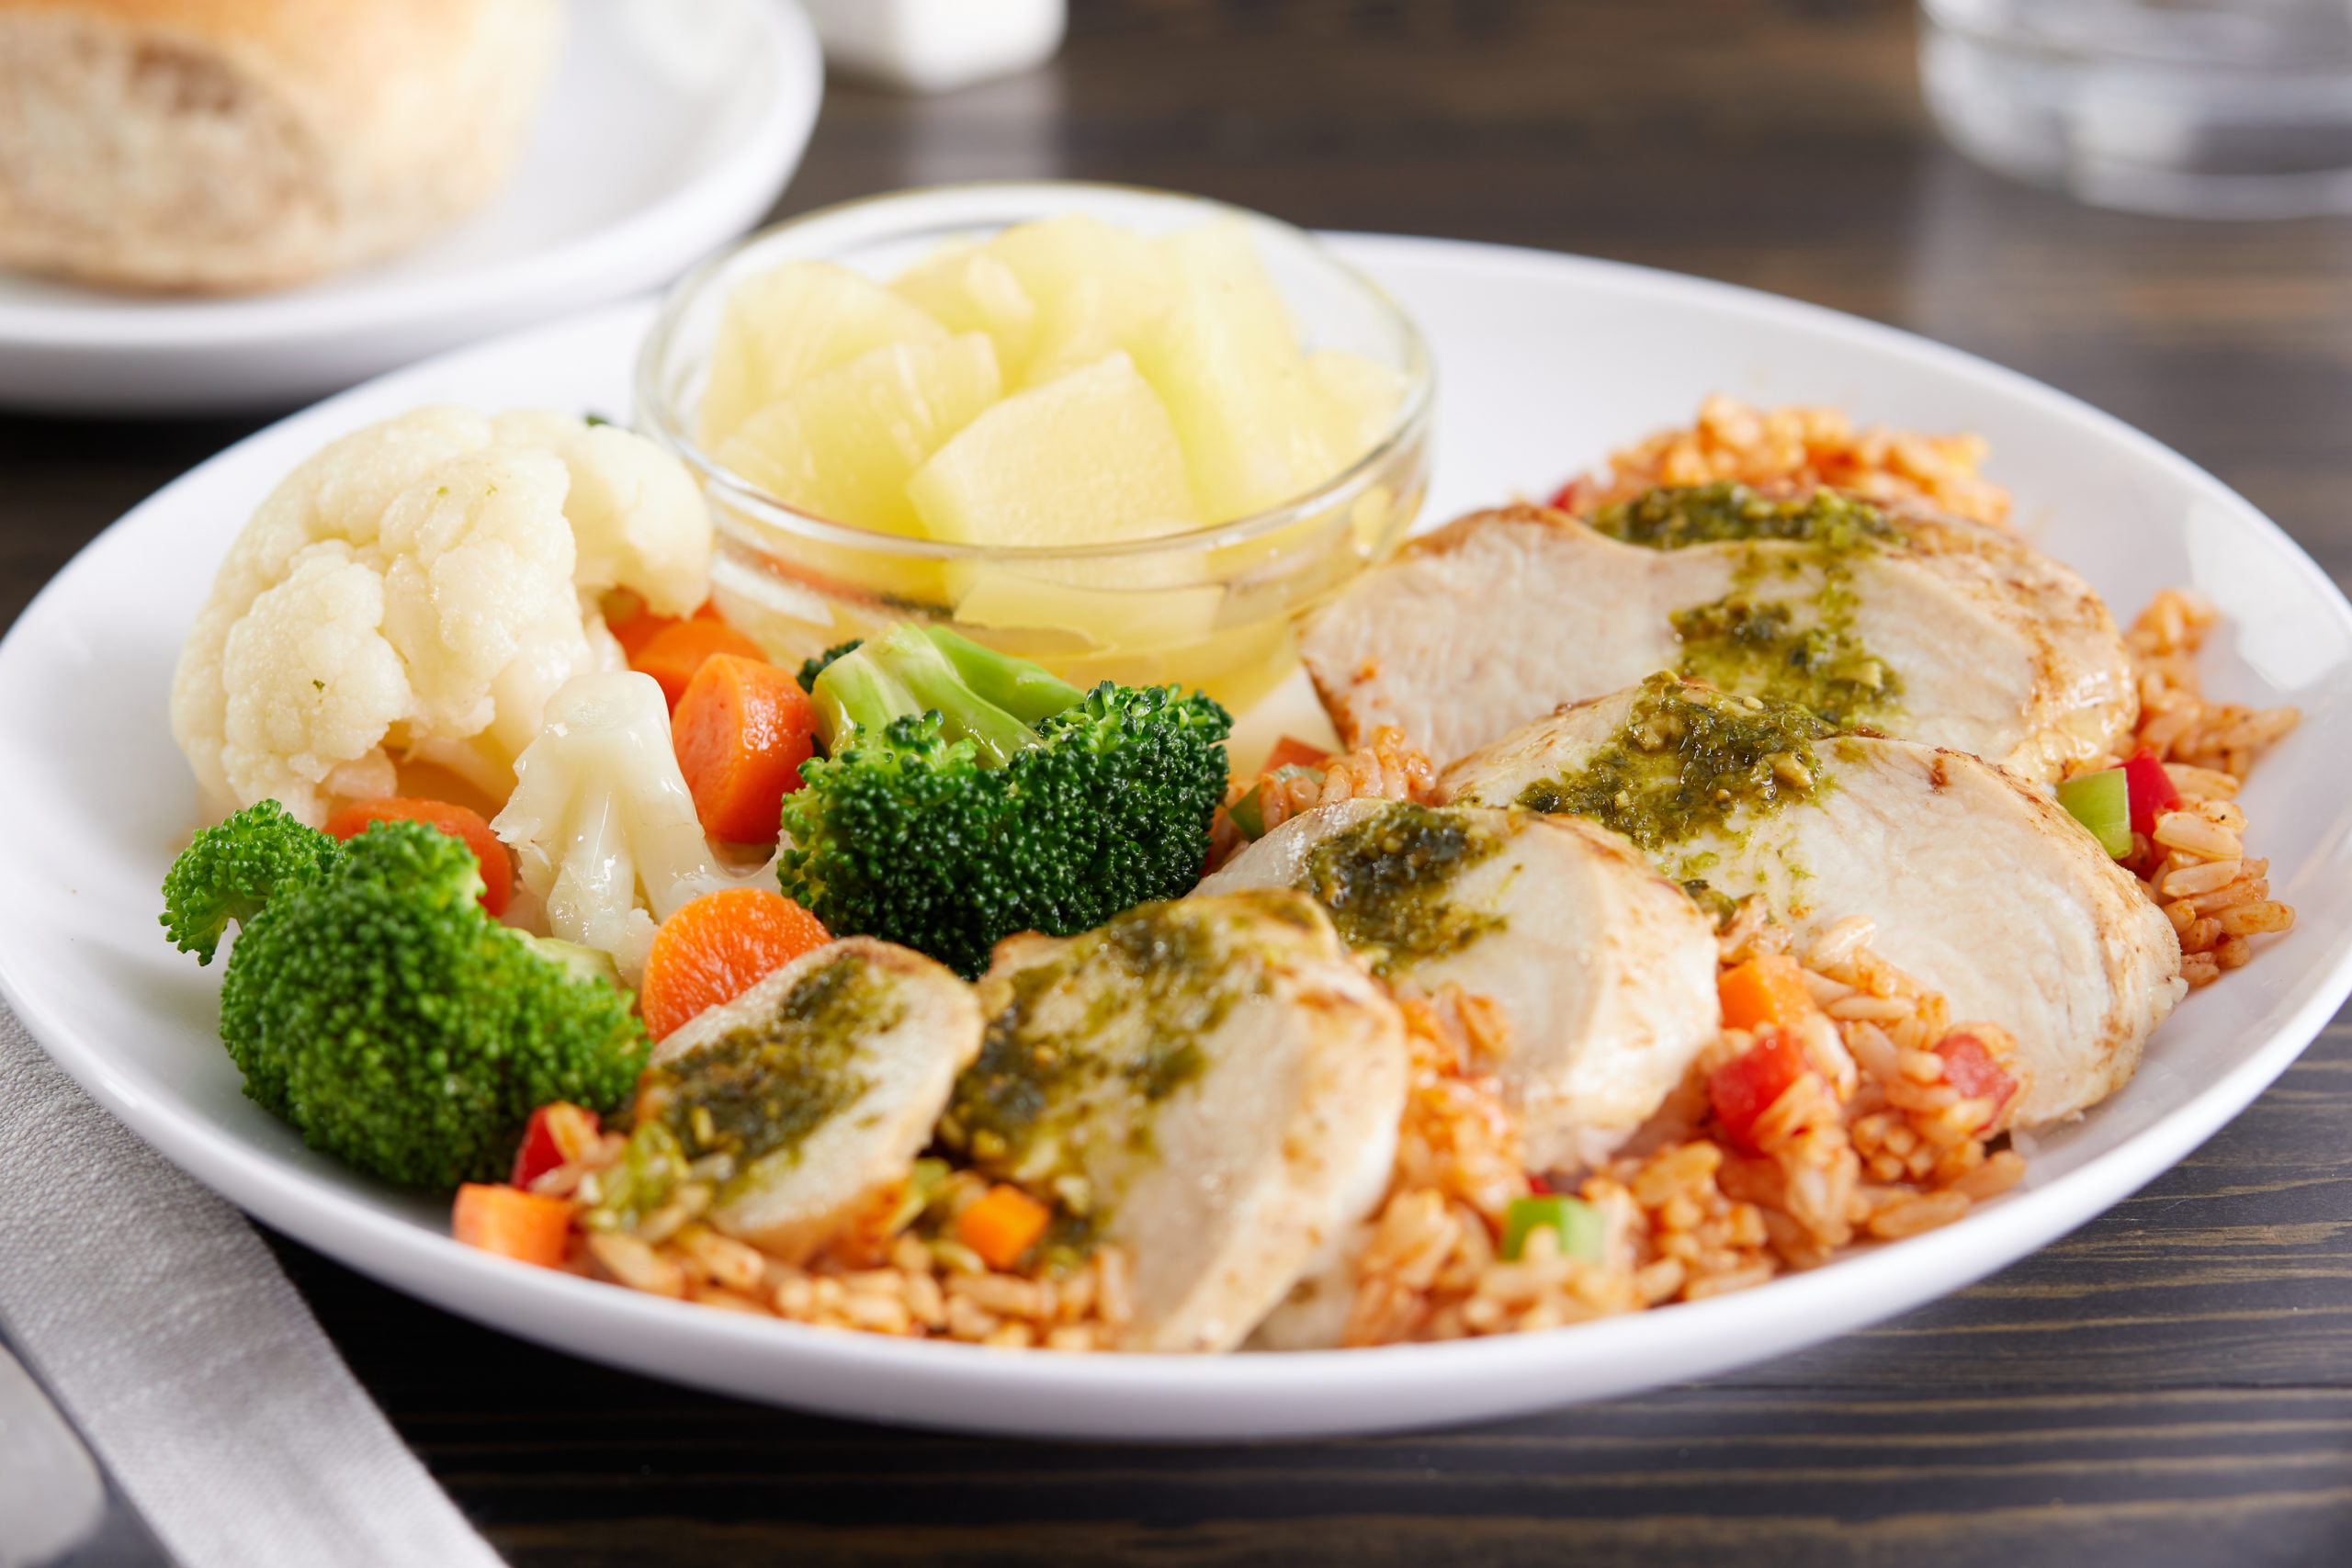 Cilantro Chicken over rice with veggies and fruit